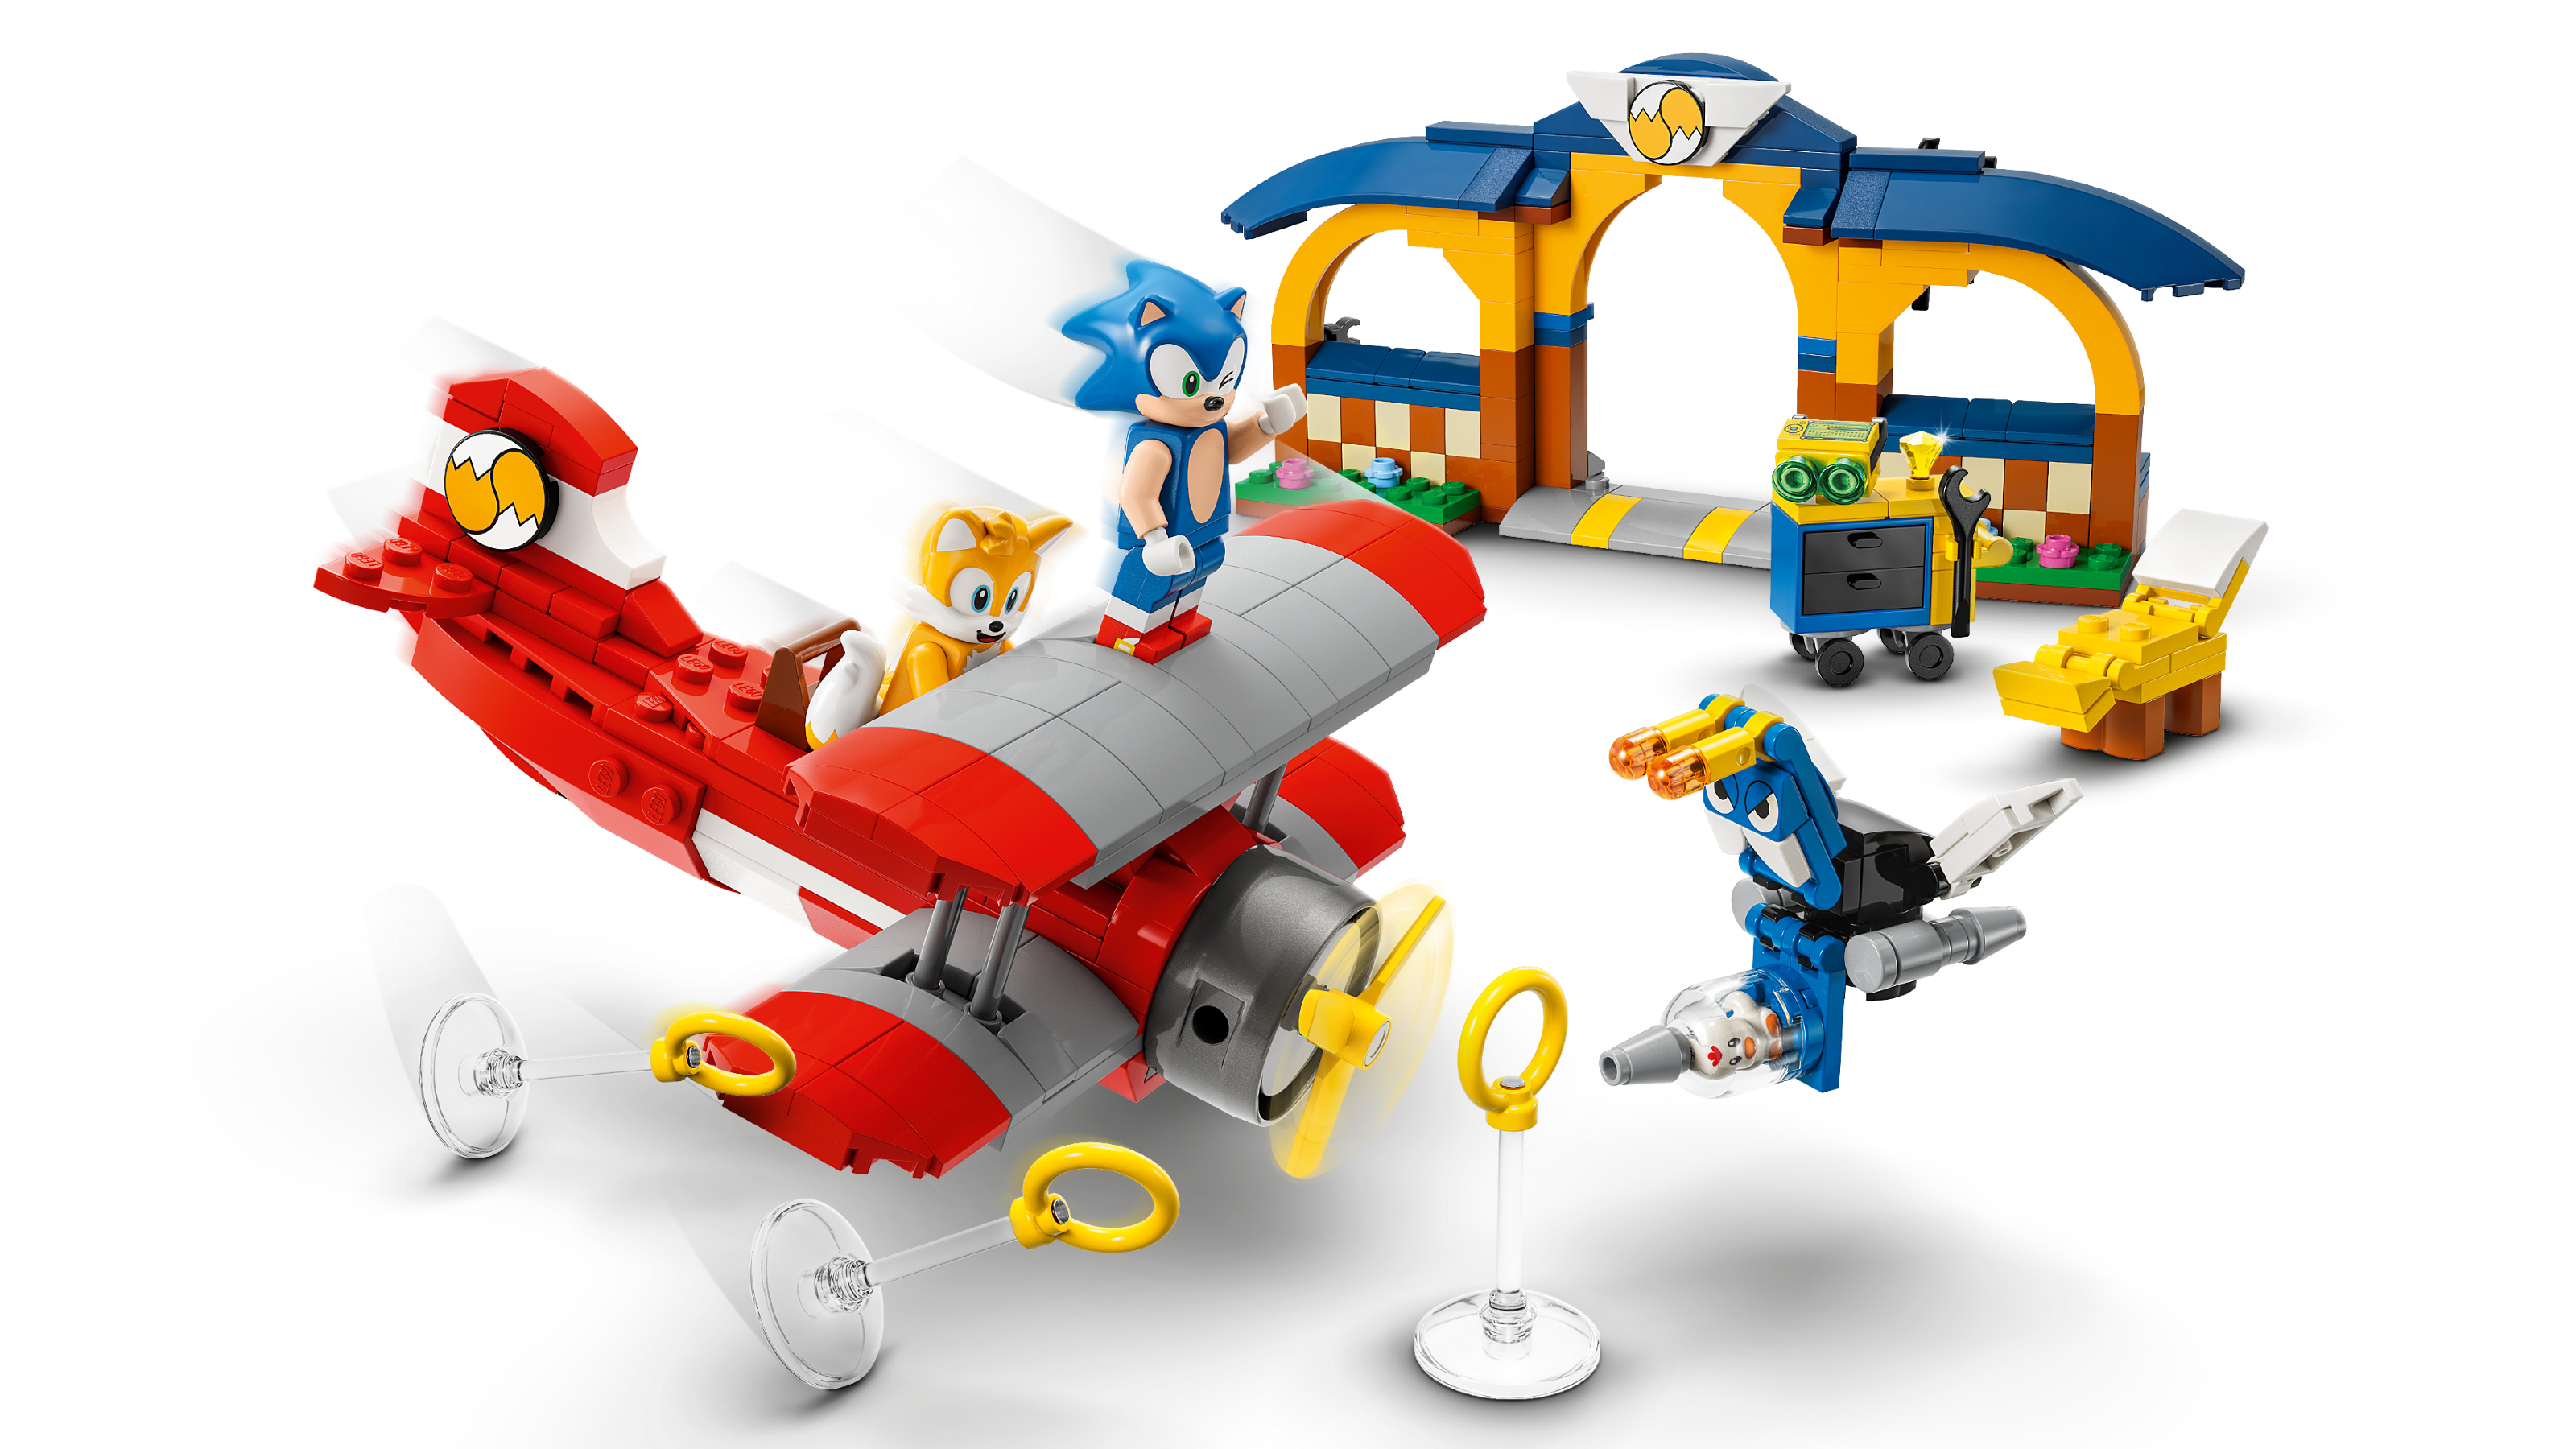 LEGO Sonic the Hedgehog™ Tails' Workshop And Tornado Plane 76991 Building  Set (376 Pieces) - JCPenney